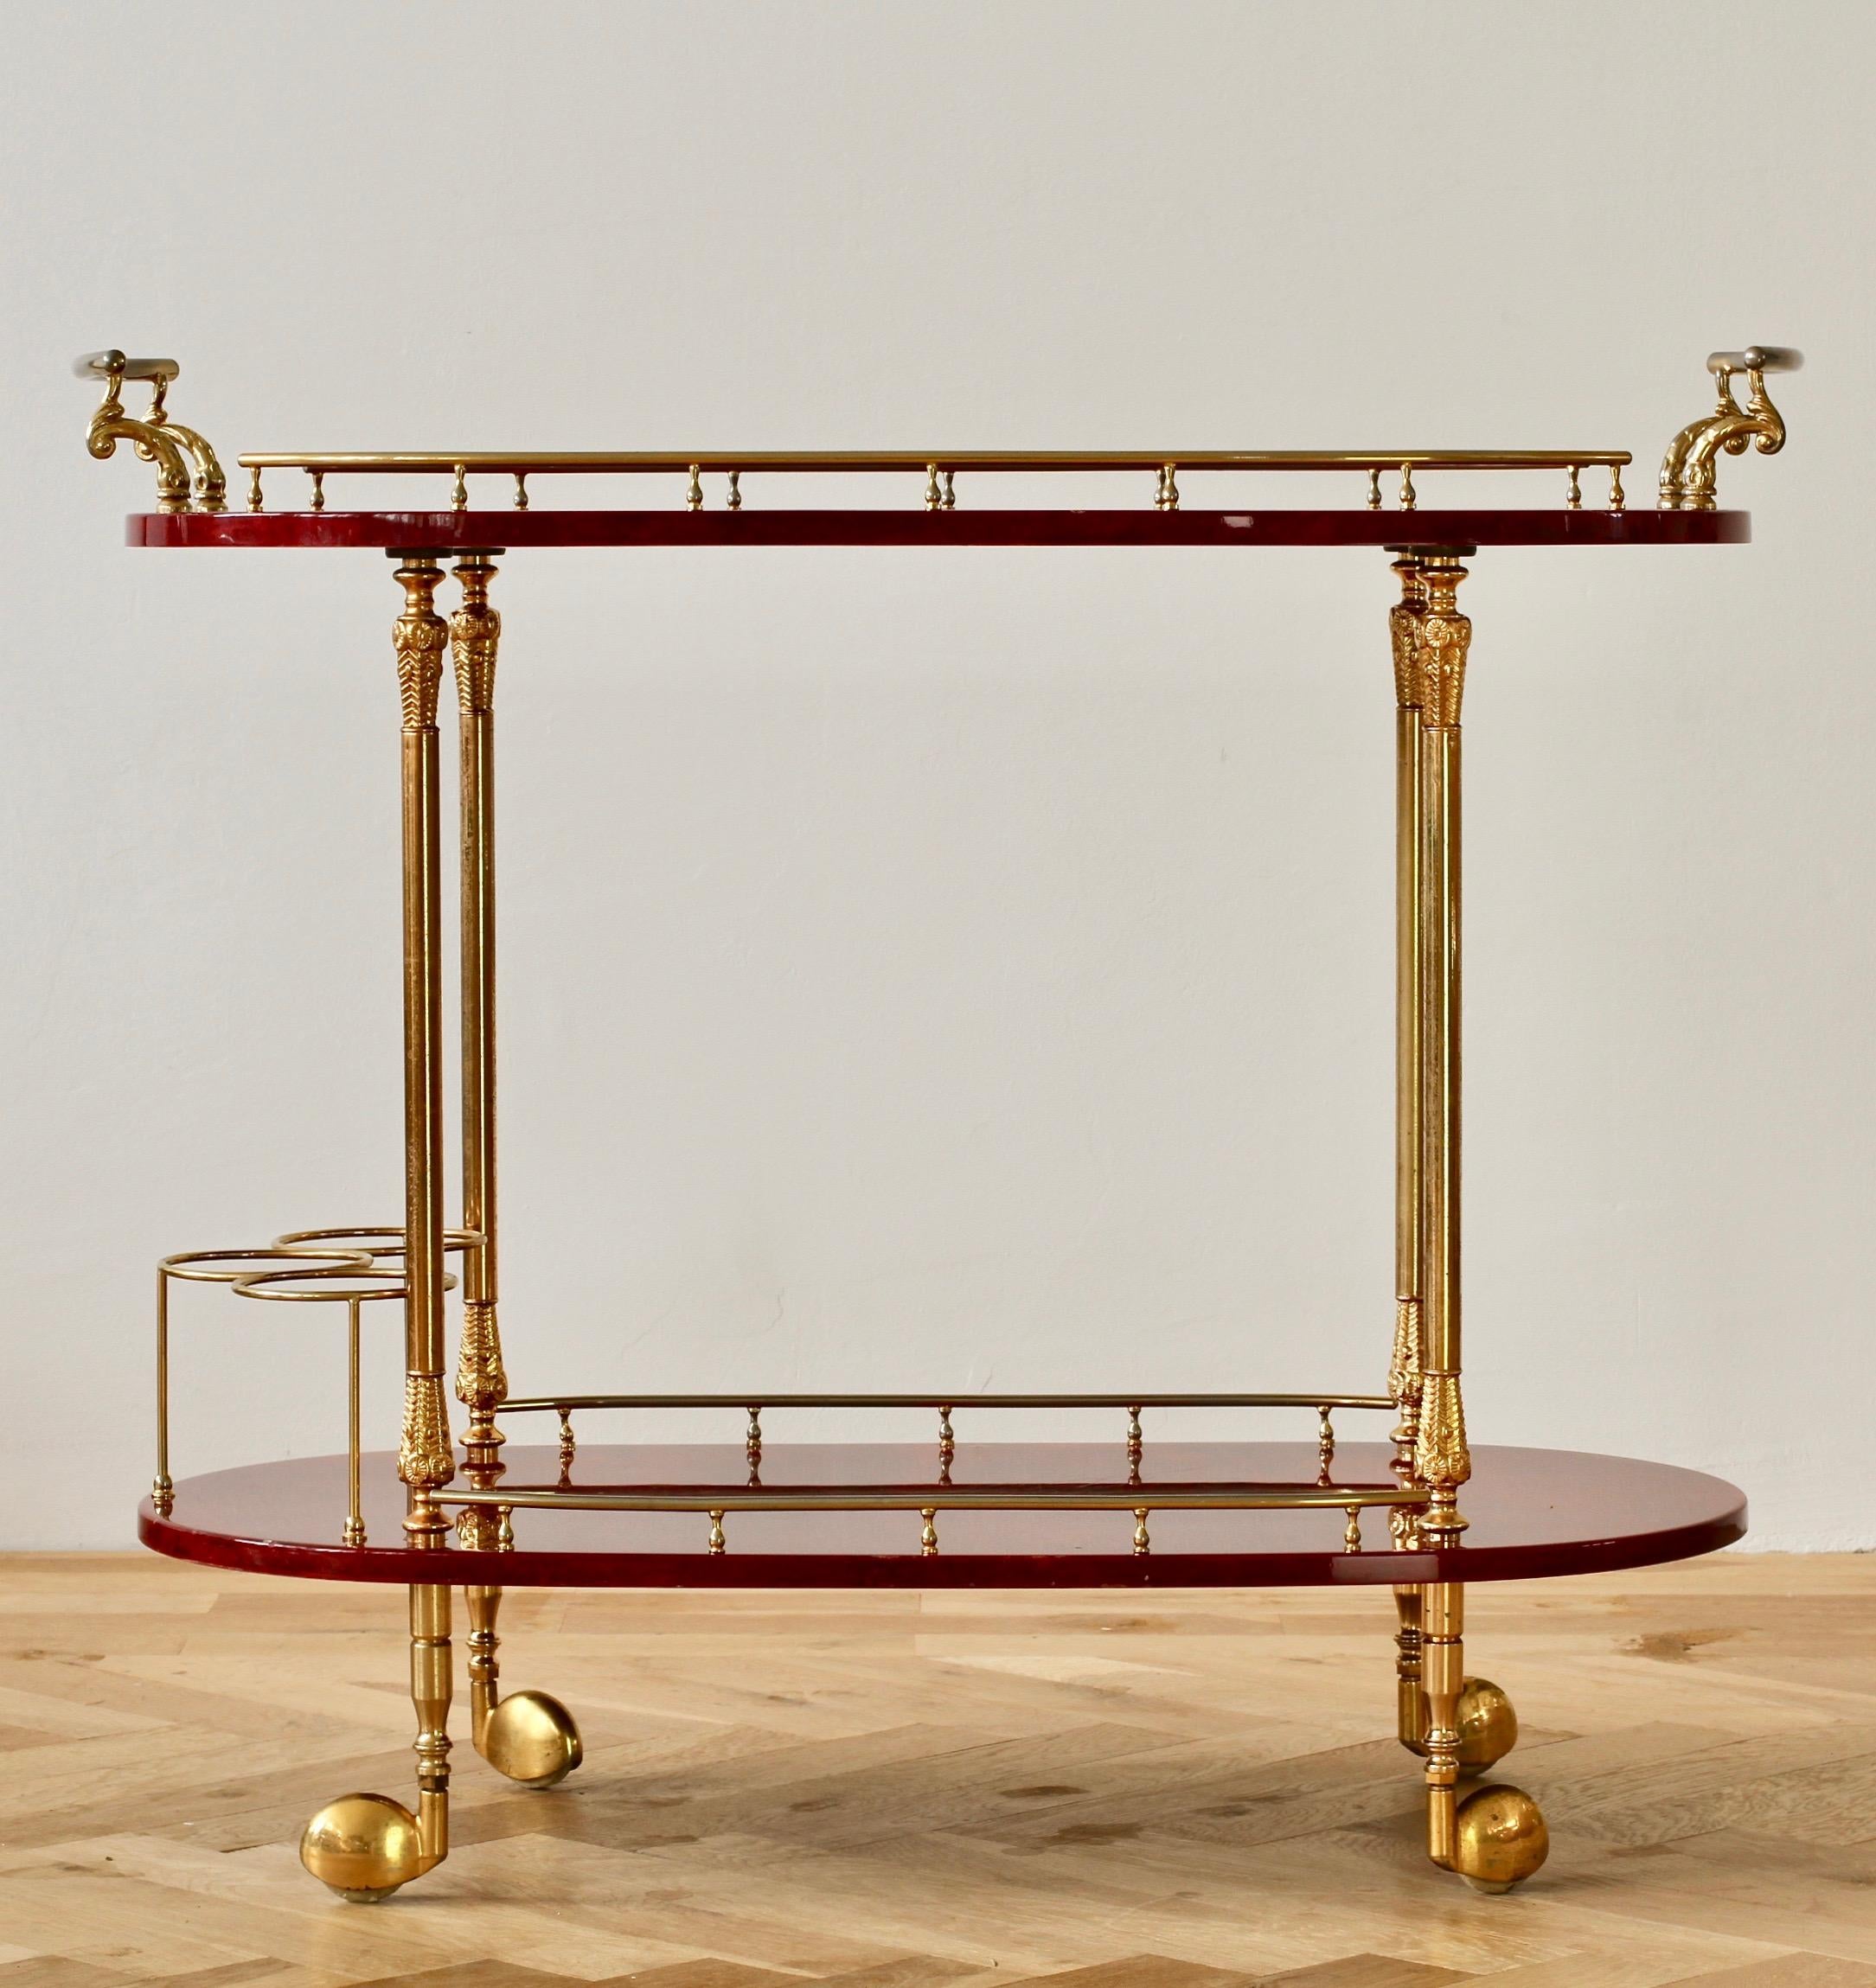 Midcentury Italian 1950s bar cart, tea trolley or drinks stand by Aldo Tura, Milan. The red colored and lacquered goatskin leather combined with gilded cast metal handles, rails and finals is perfect for any Mid-Century or Hollywood Regency